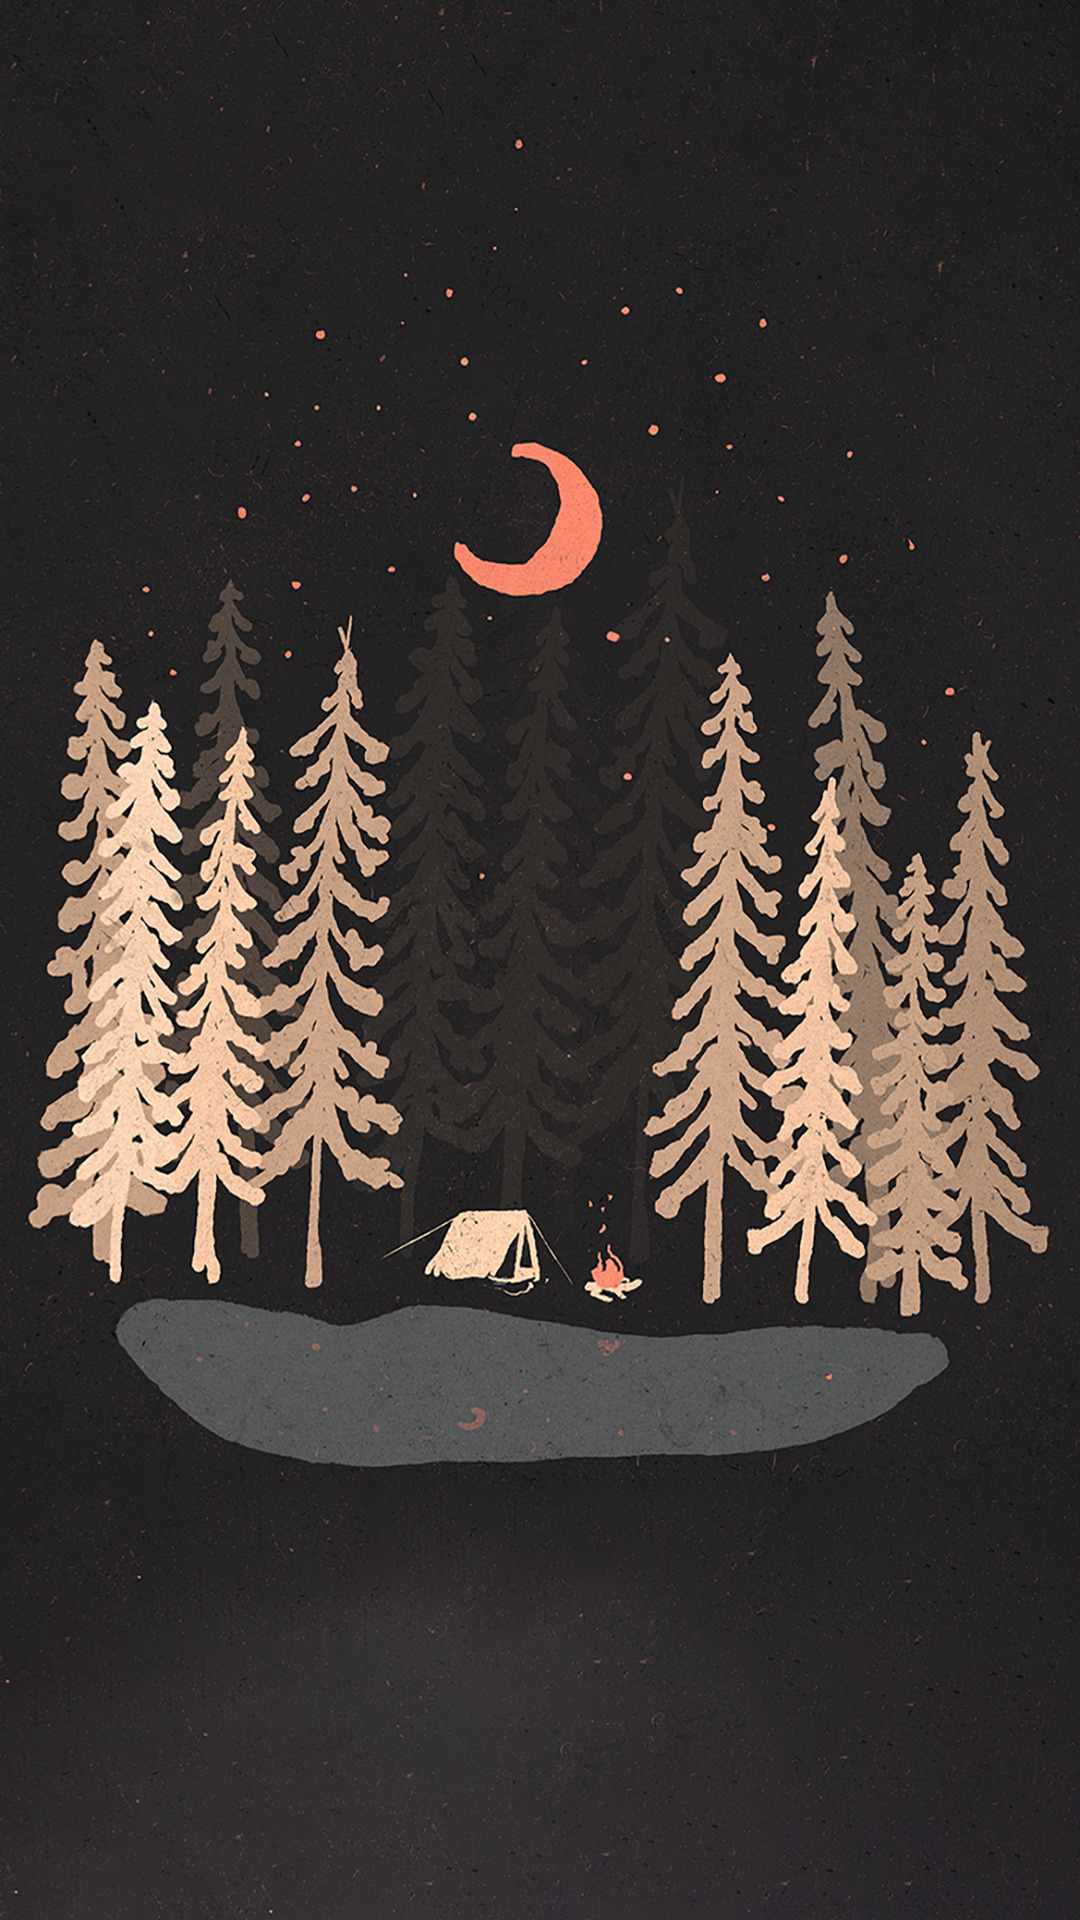 digital Art, Portrait Display, Nature, Trees, Forest, Camping, Water, Lake, Tent, Fire, Moon, Stars, Night, Simple Background Wallpaper